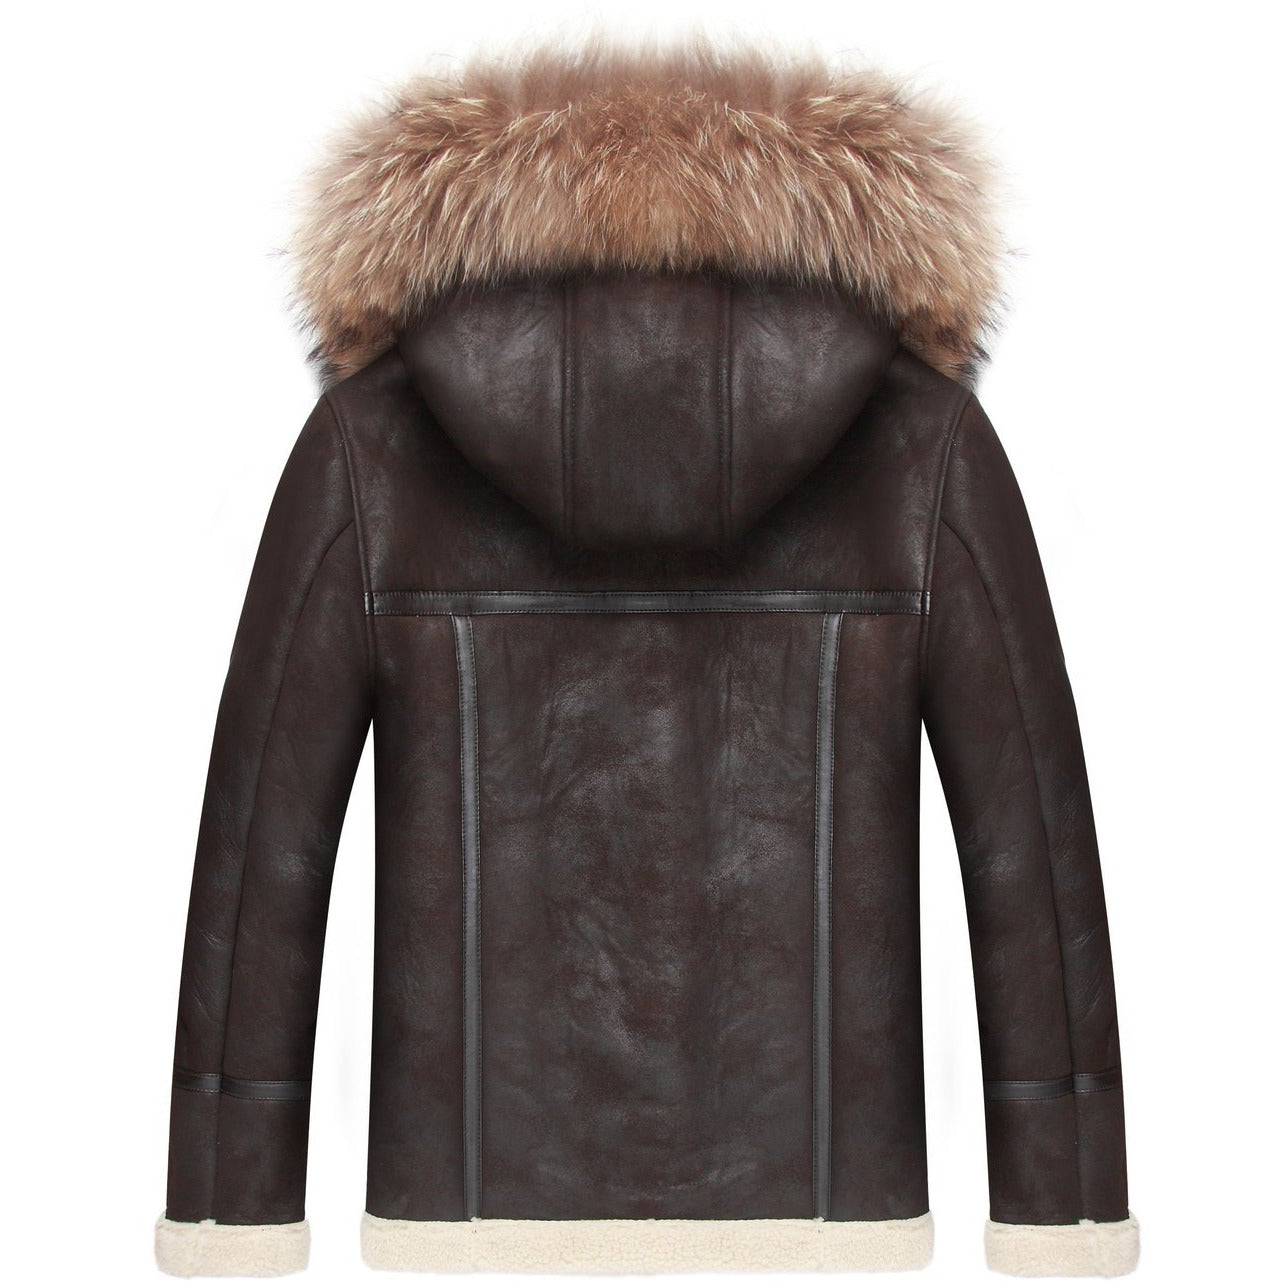 Mason & Cooper Men's B3 Faux Shearling Jacket with Zip Out hood - Zooloo Leather